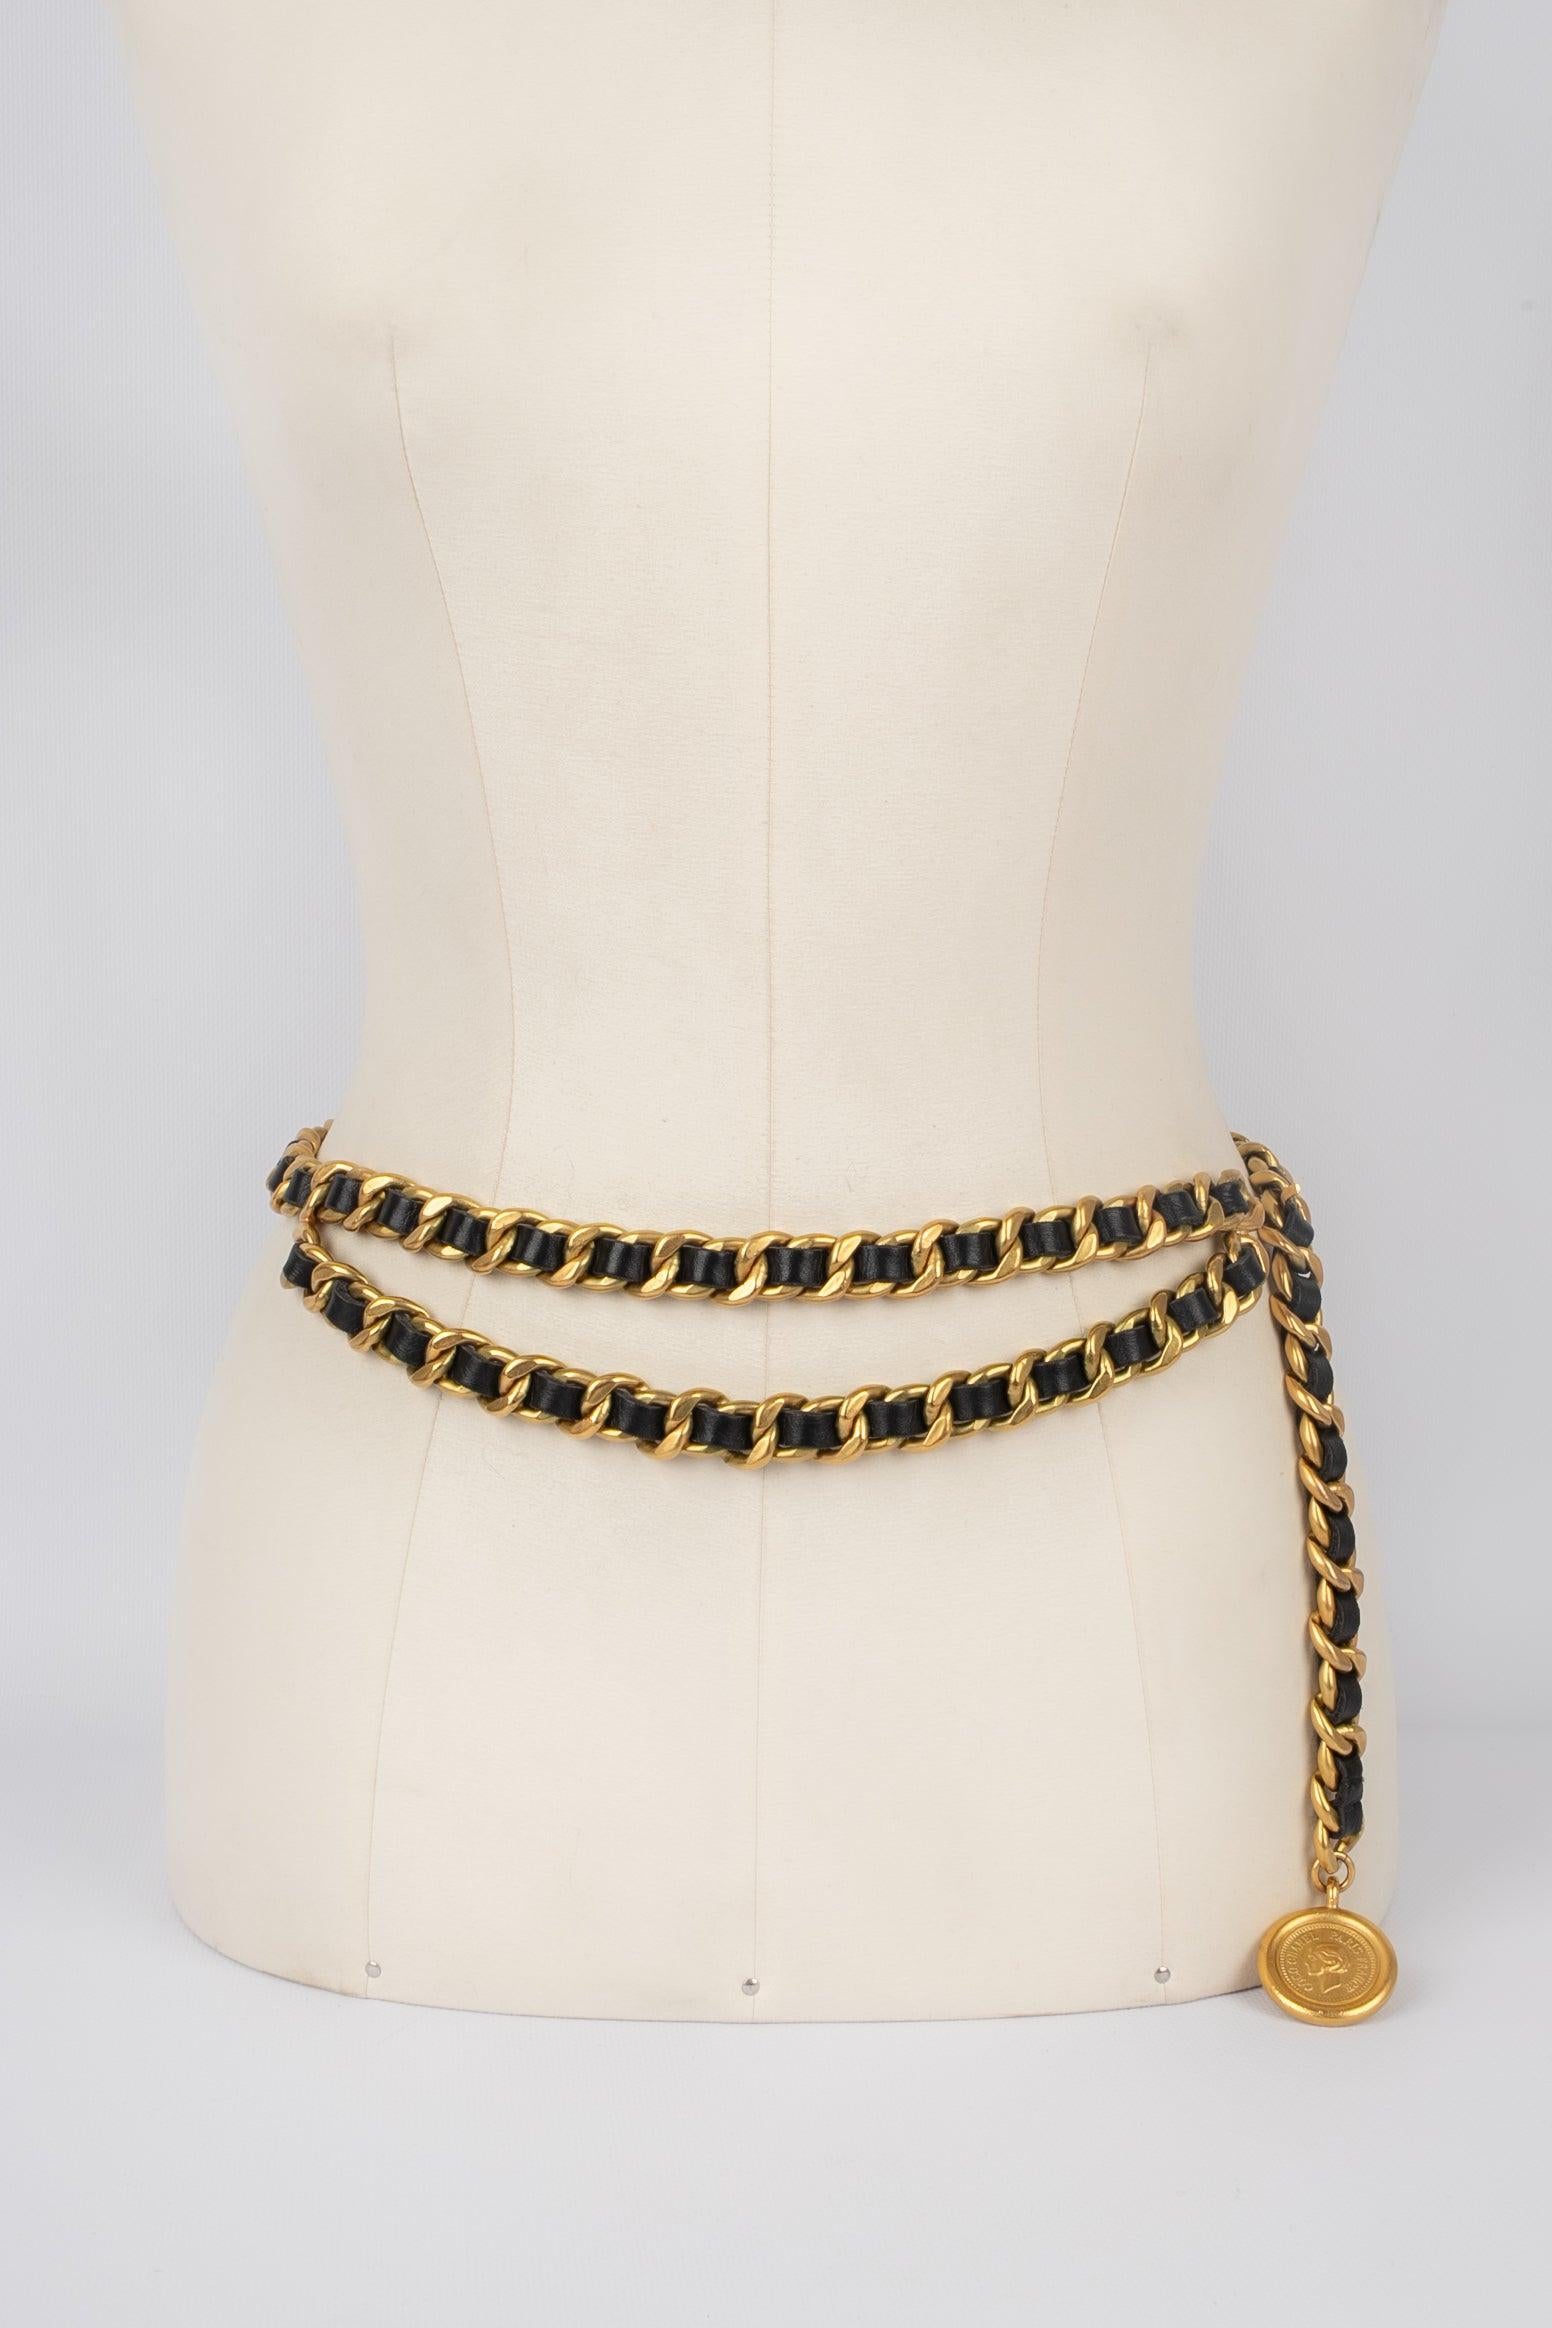 Chanel- (Made in France) Golden metal belt interlaced with black leather. 1994 Fall-Winter Collection.

Additional information:
Condition: Very good condition
Dimensions: Length: 87 cm
Period: 20th Century

Seller Reference: CCB56
